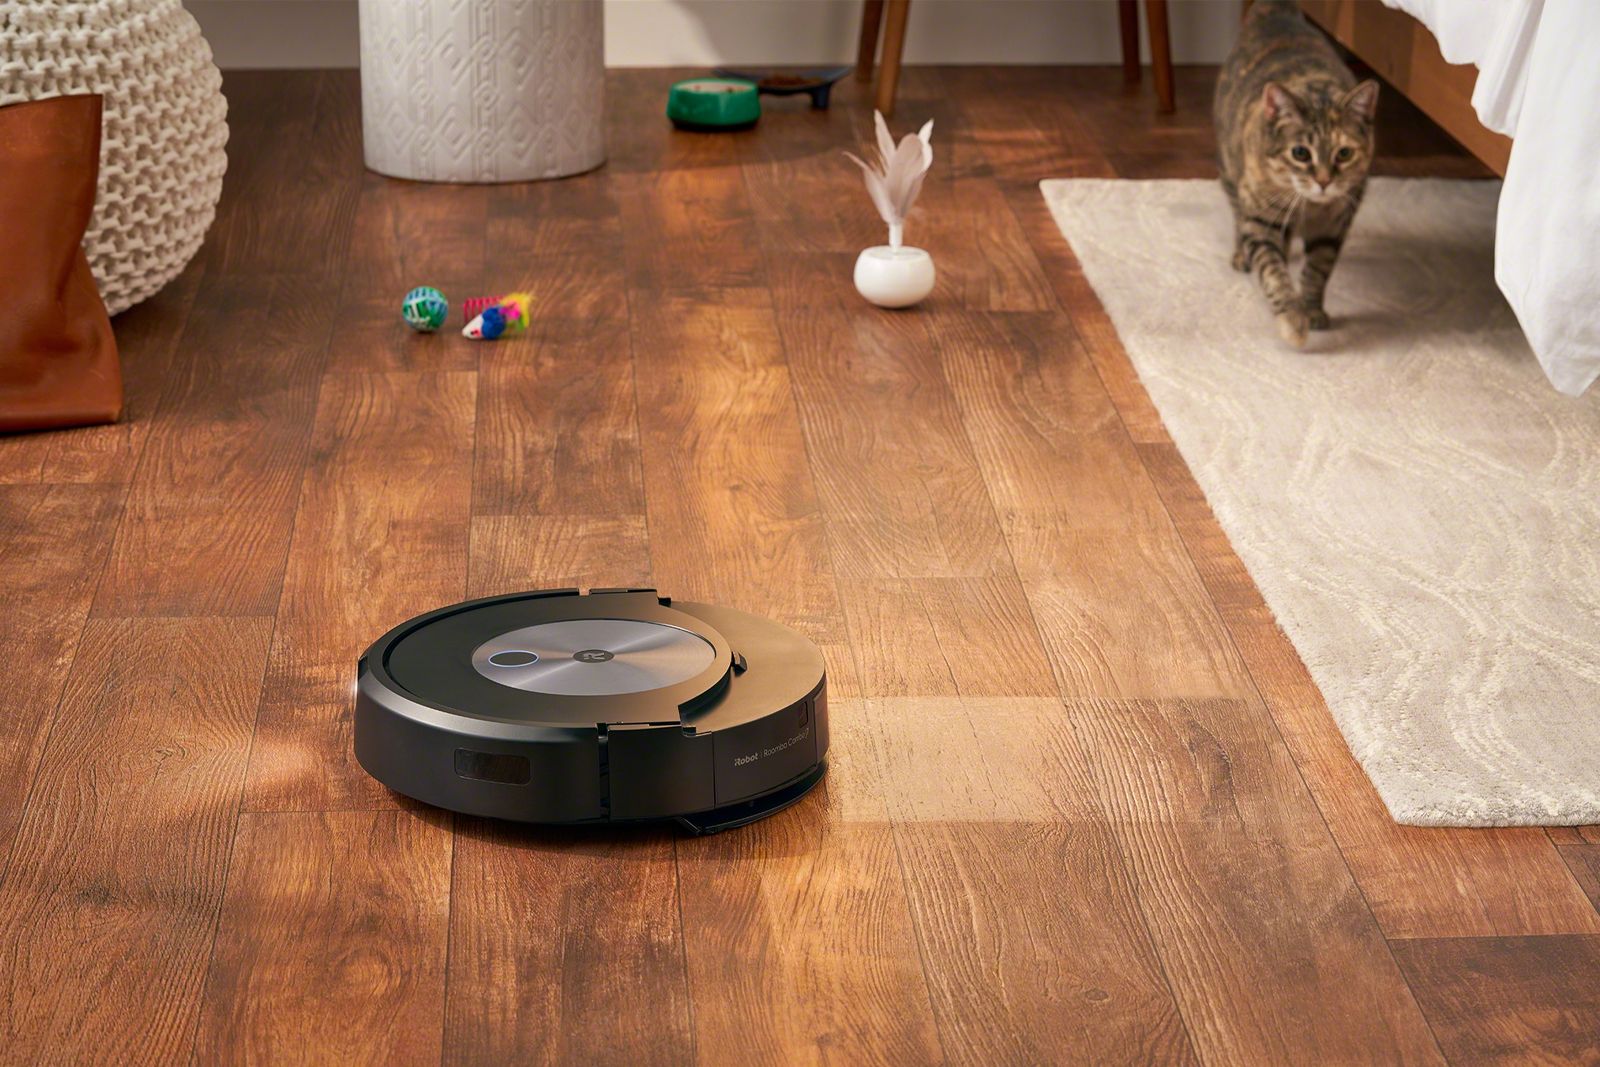 iRobot Roomba Combo J7+ can vacuum and mop at the same time